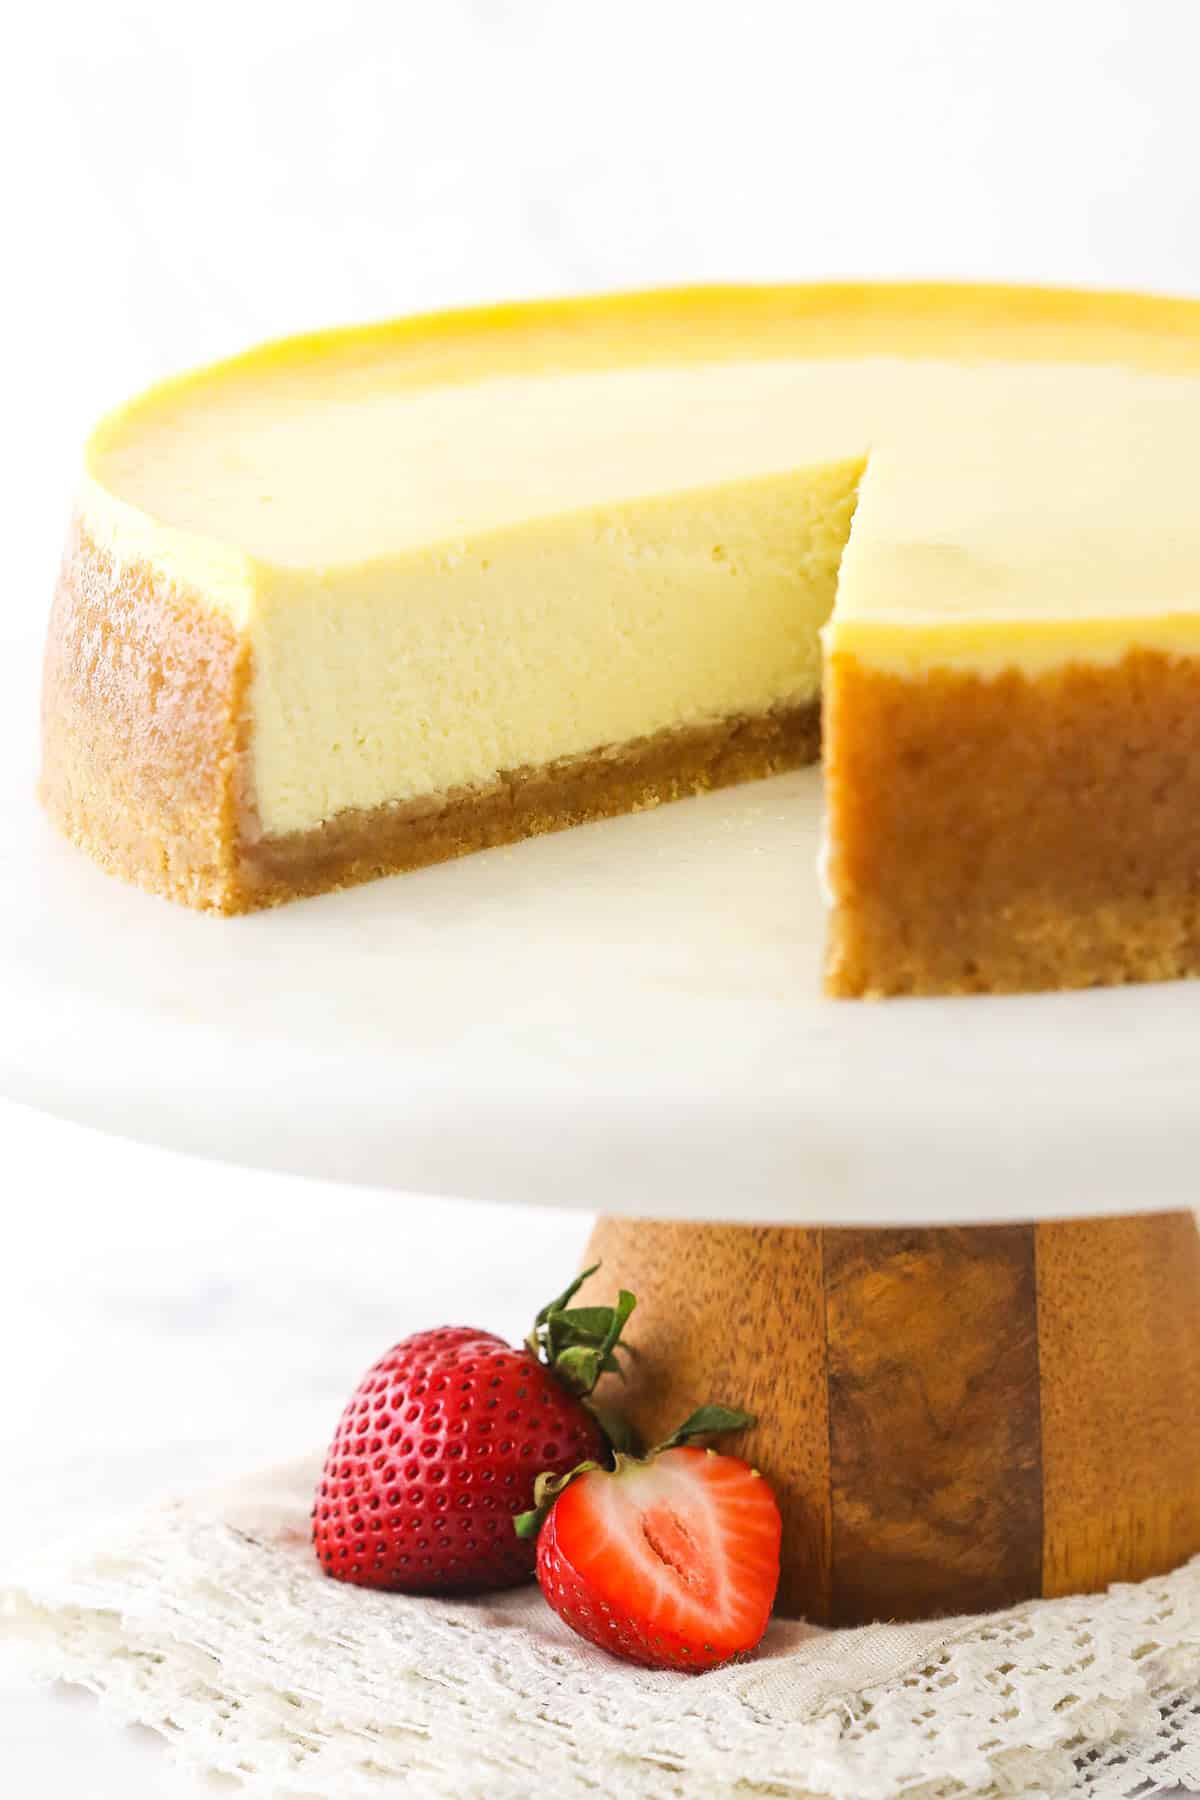 Classic cheesecake with a slice taken out